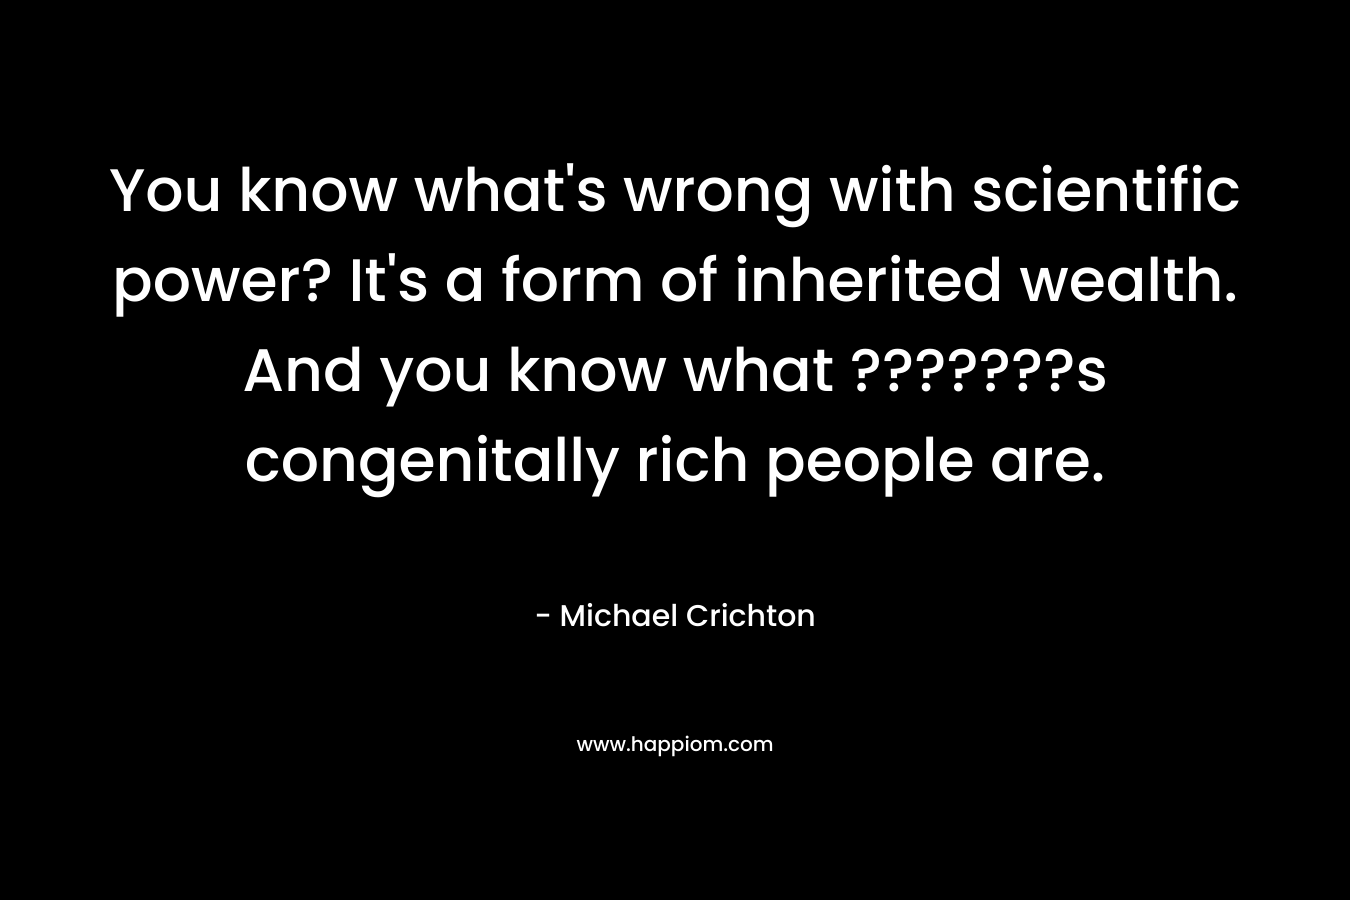 You know what’s wrong with scientific power? It’s a form of inherited wealth. And you know what ???????s congenitally rich people are. – Michael Crichton